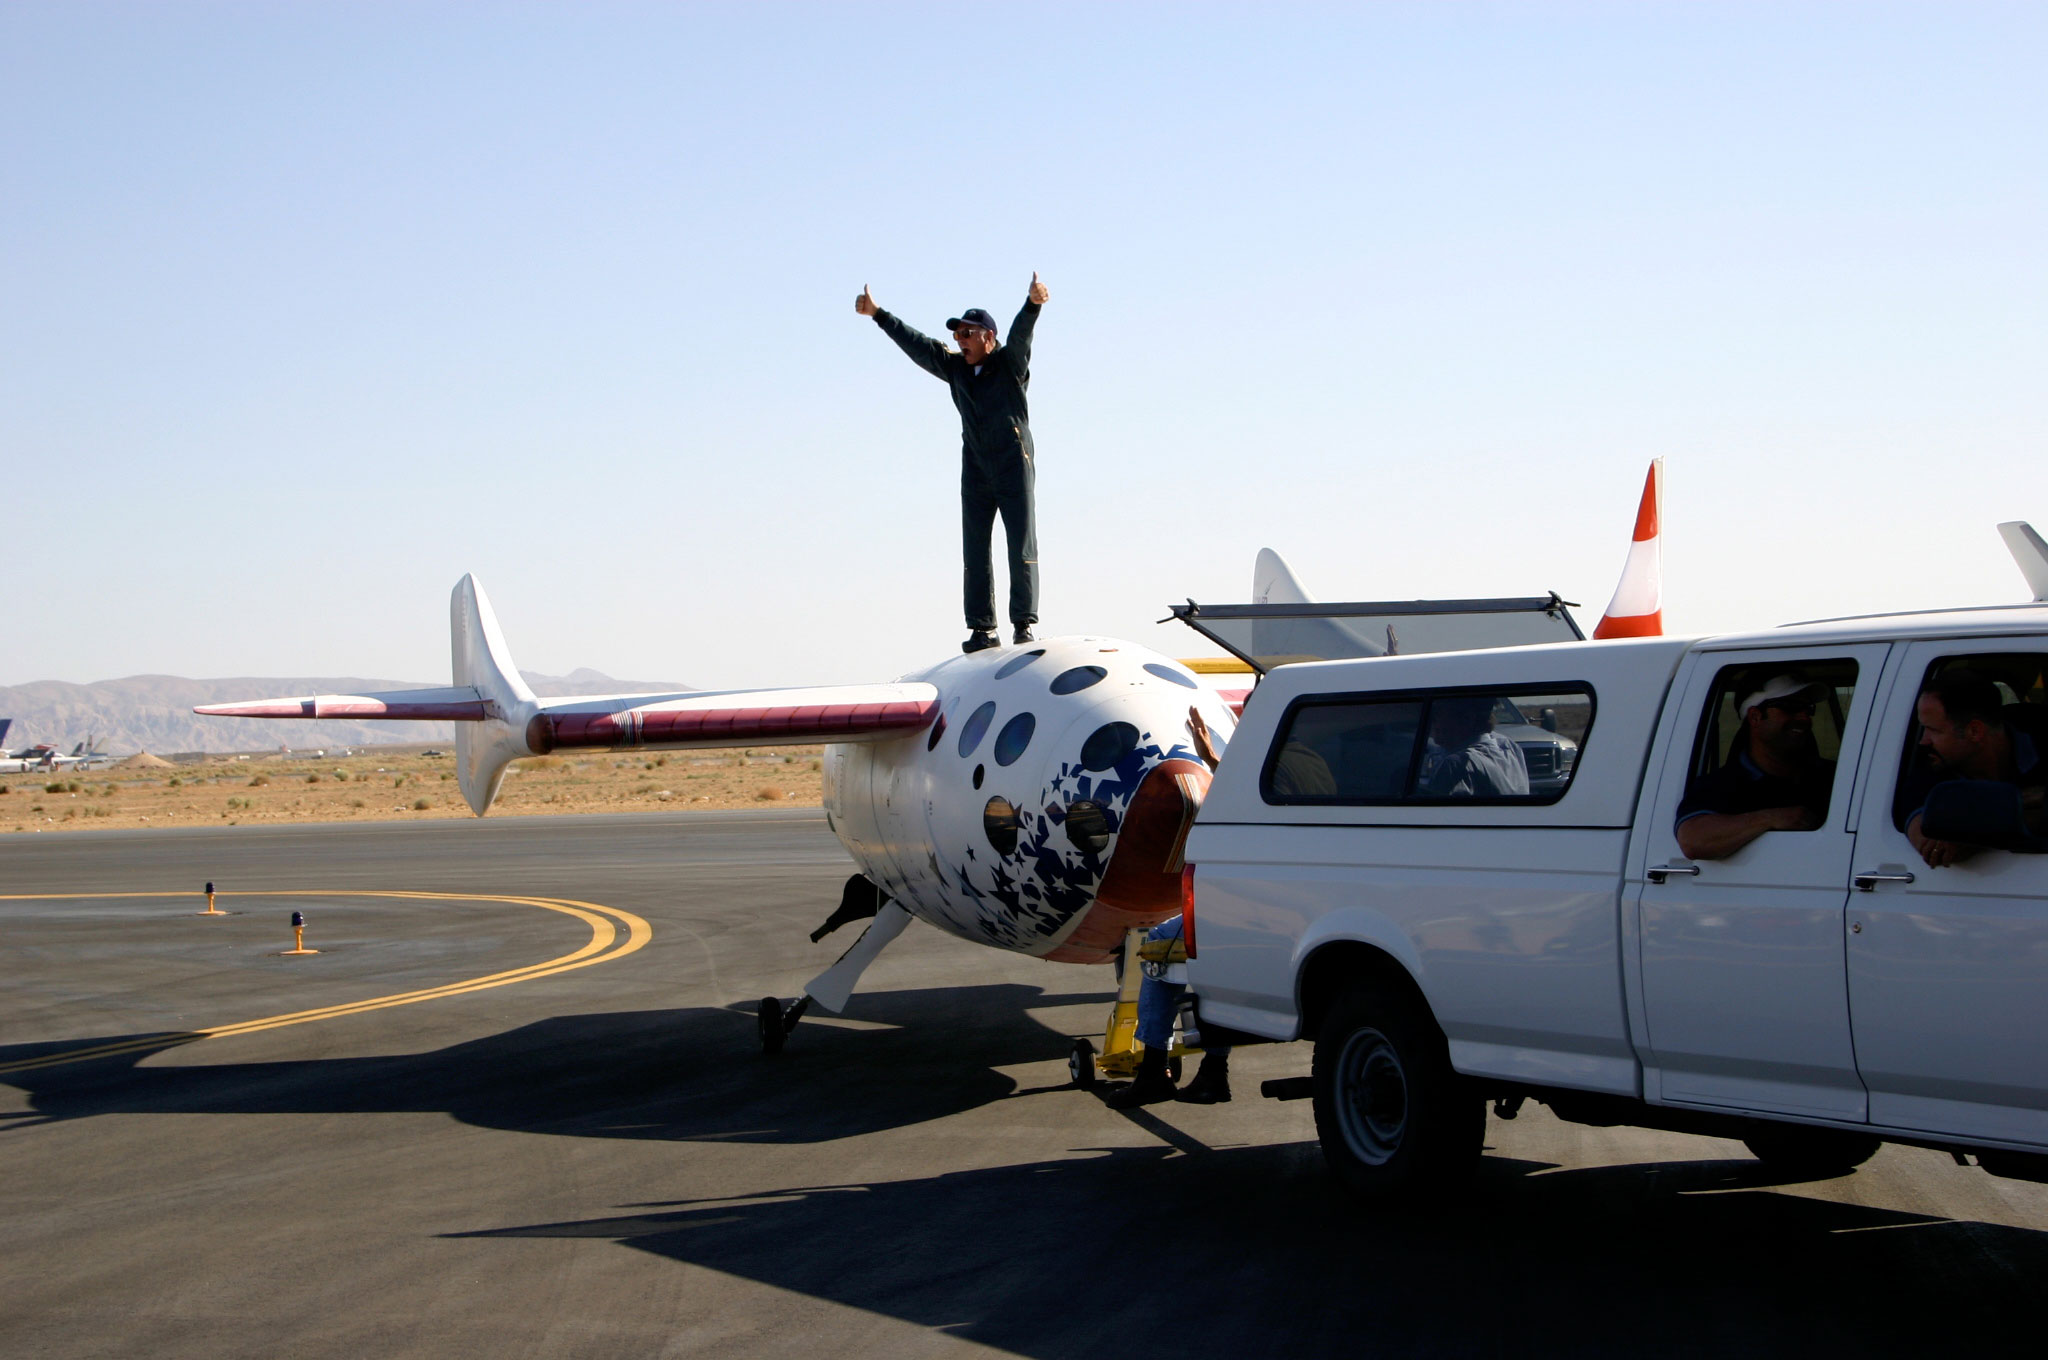 Mike Melvill celebrates atop SpaceShipOne (right) after completion of his first of two trips to outer space aboard the vehicle. Credit: http://www.flickr.com/photos/densaer/